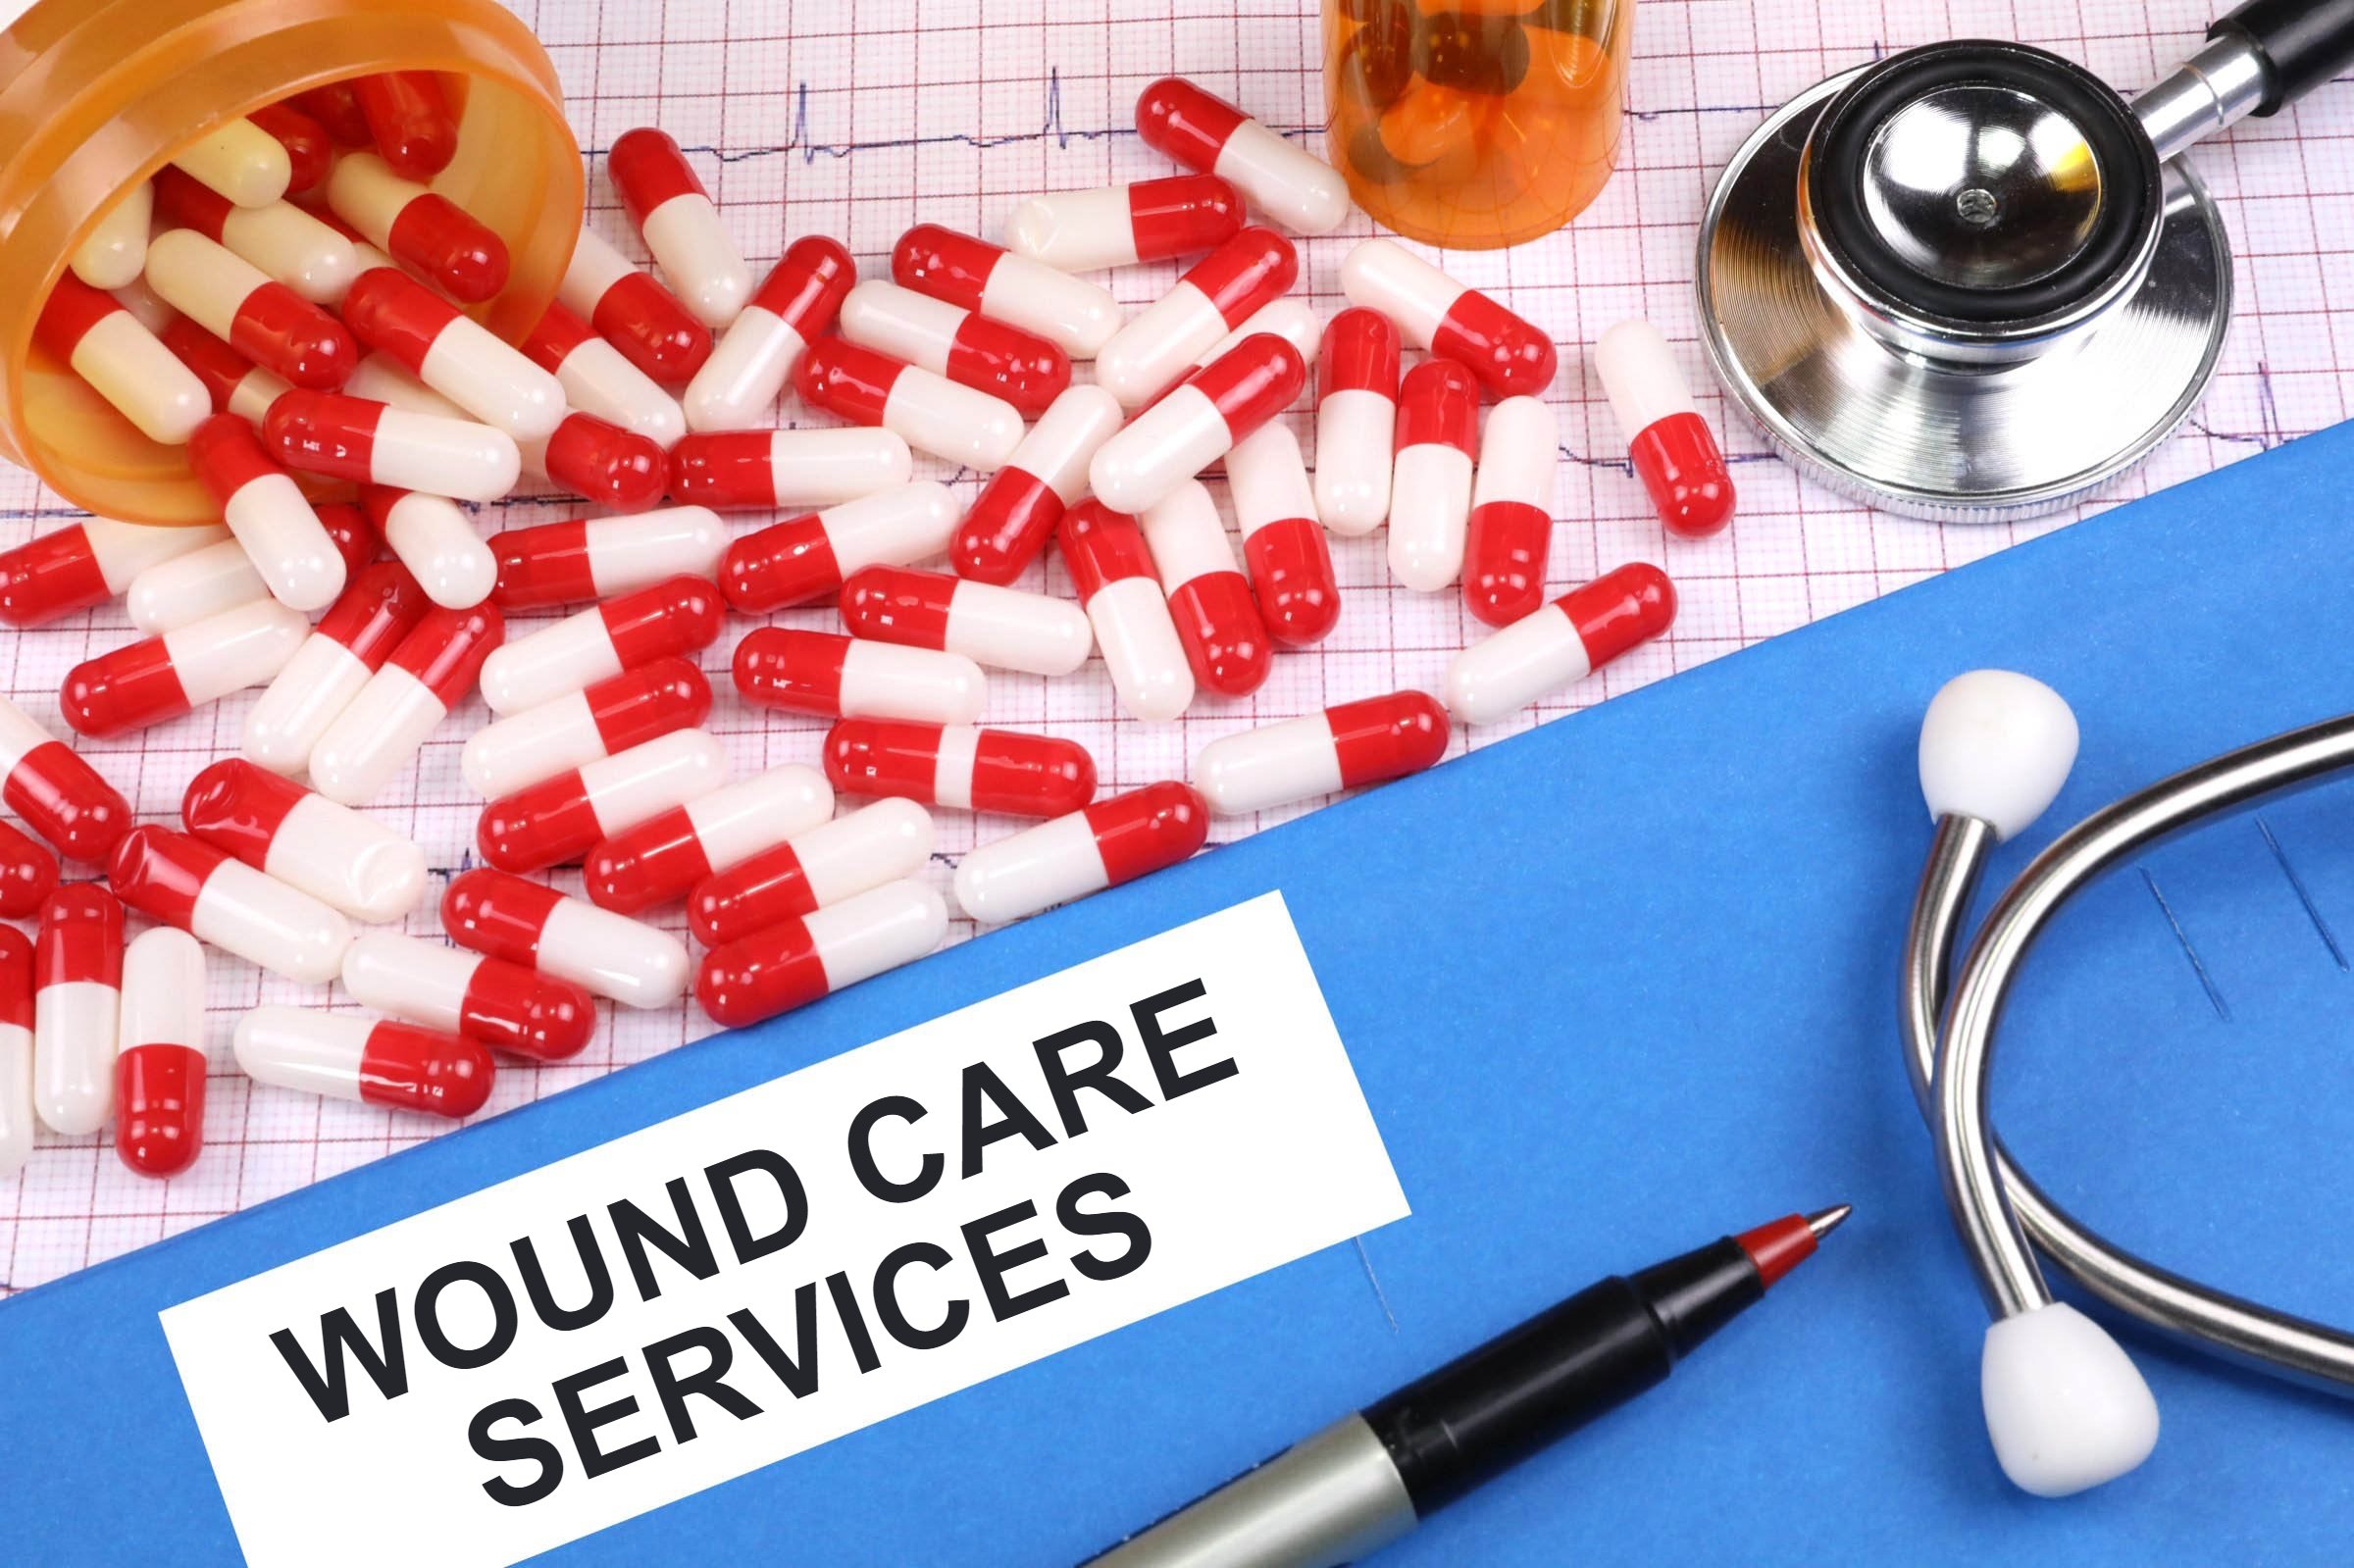 Wound Care Services 